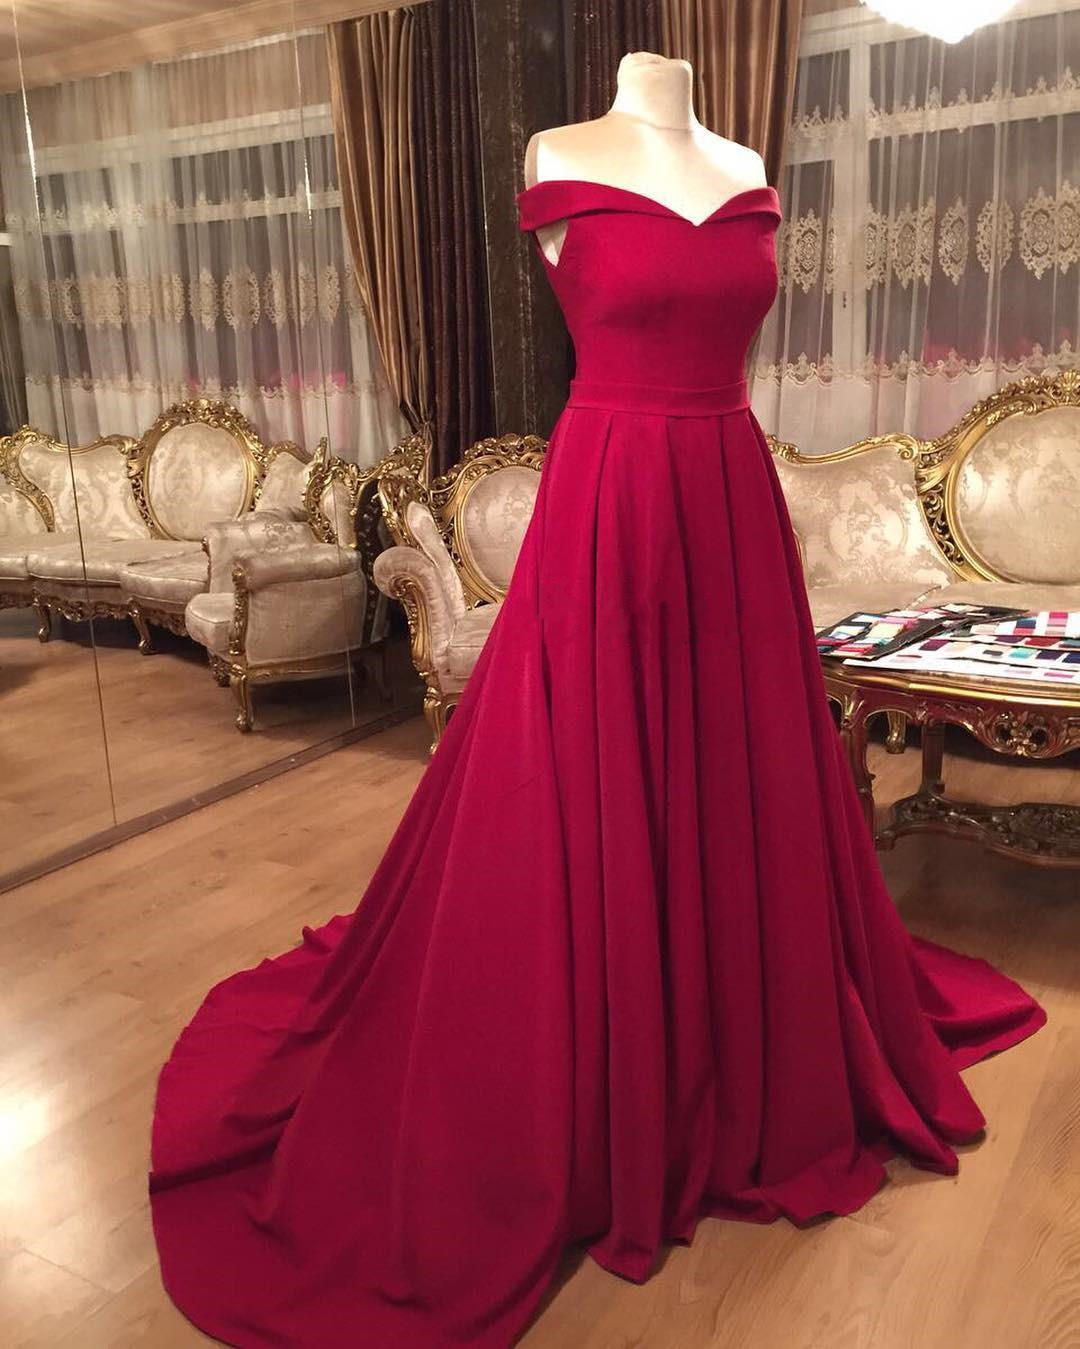 Long Dark Red Prom Dresses With Train Formal Evening Gown Off The Shoulder Junior Senior Party Dress Custom Plus Size 2018